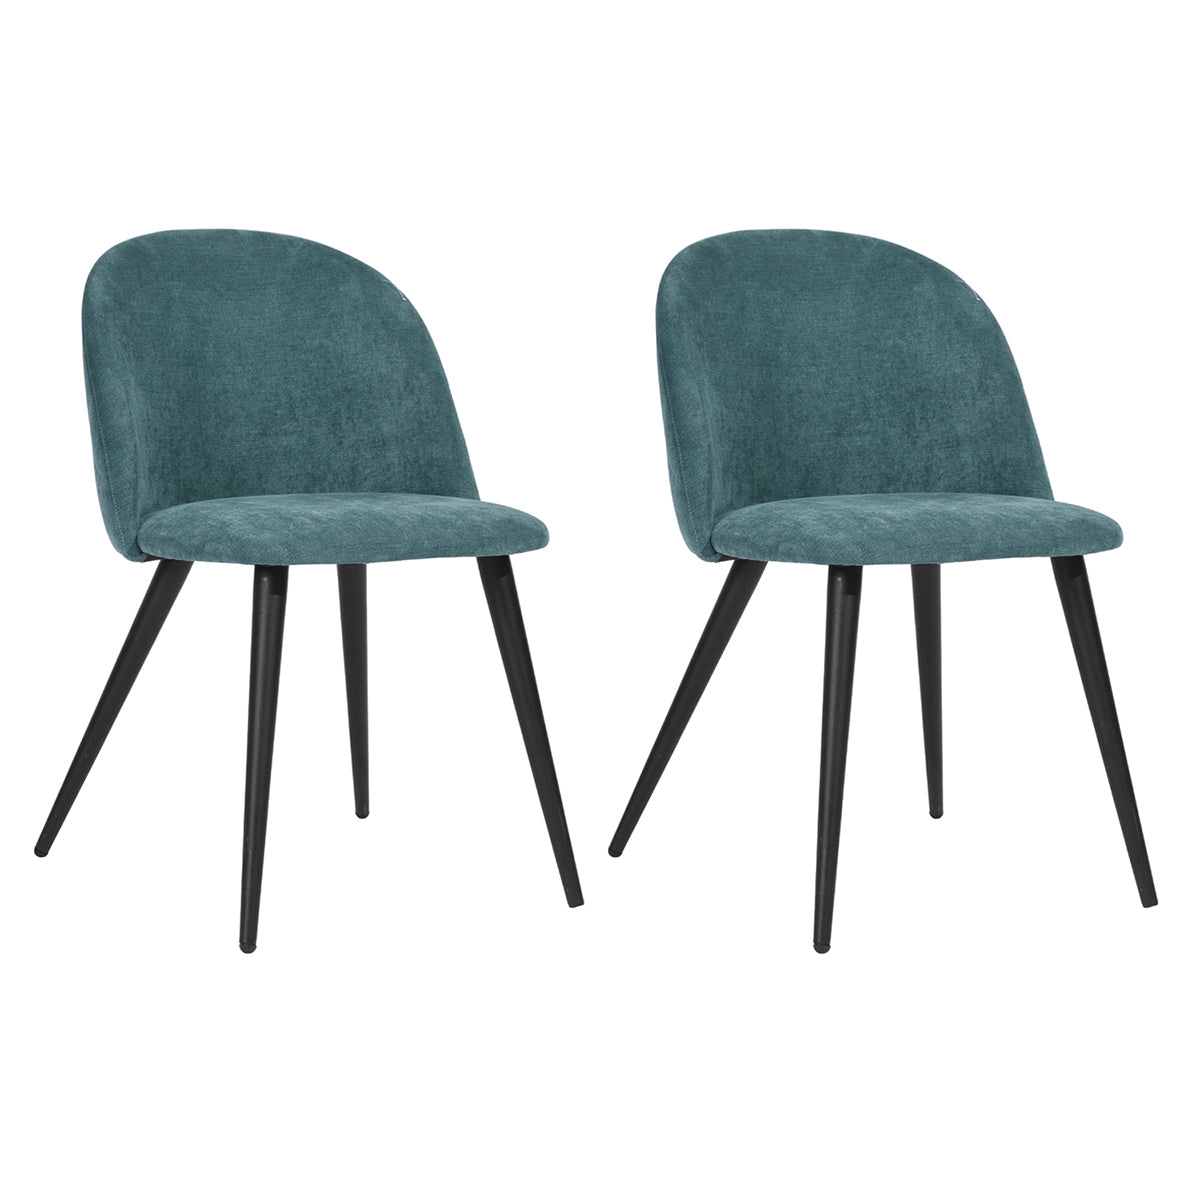 Upholstered Arm Chair/Dinning Chair (Set of 2)